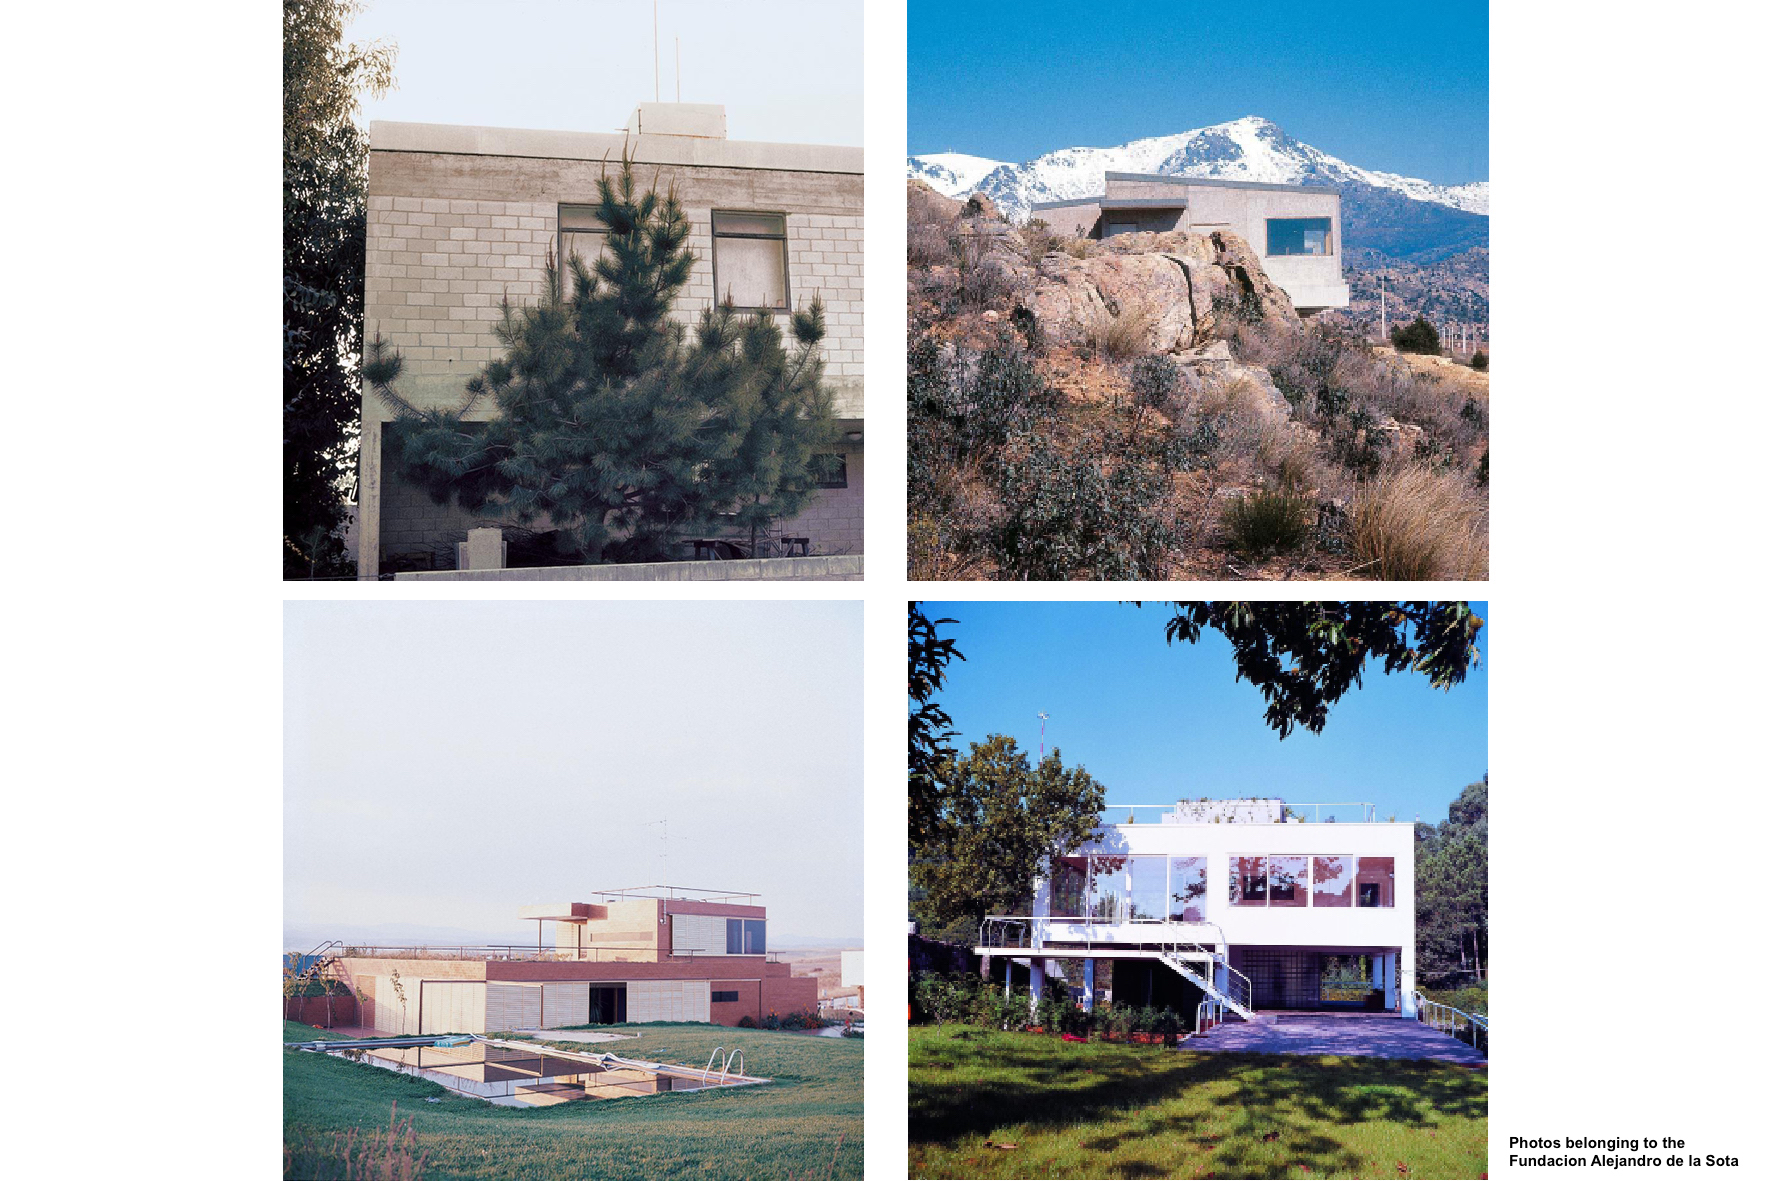 The conservation of the house as heritage, single-family houses of Alejandro de la Sota